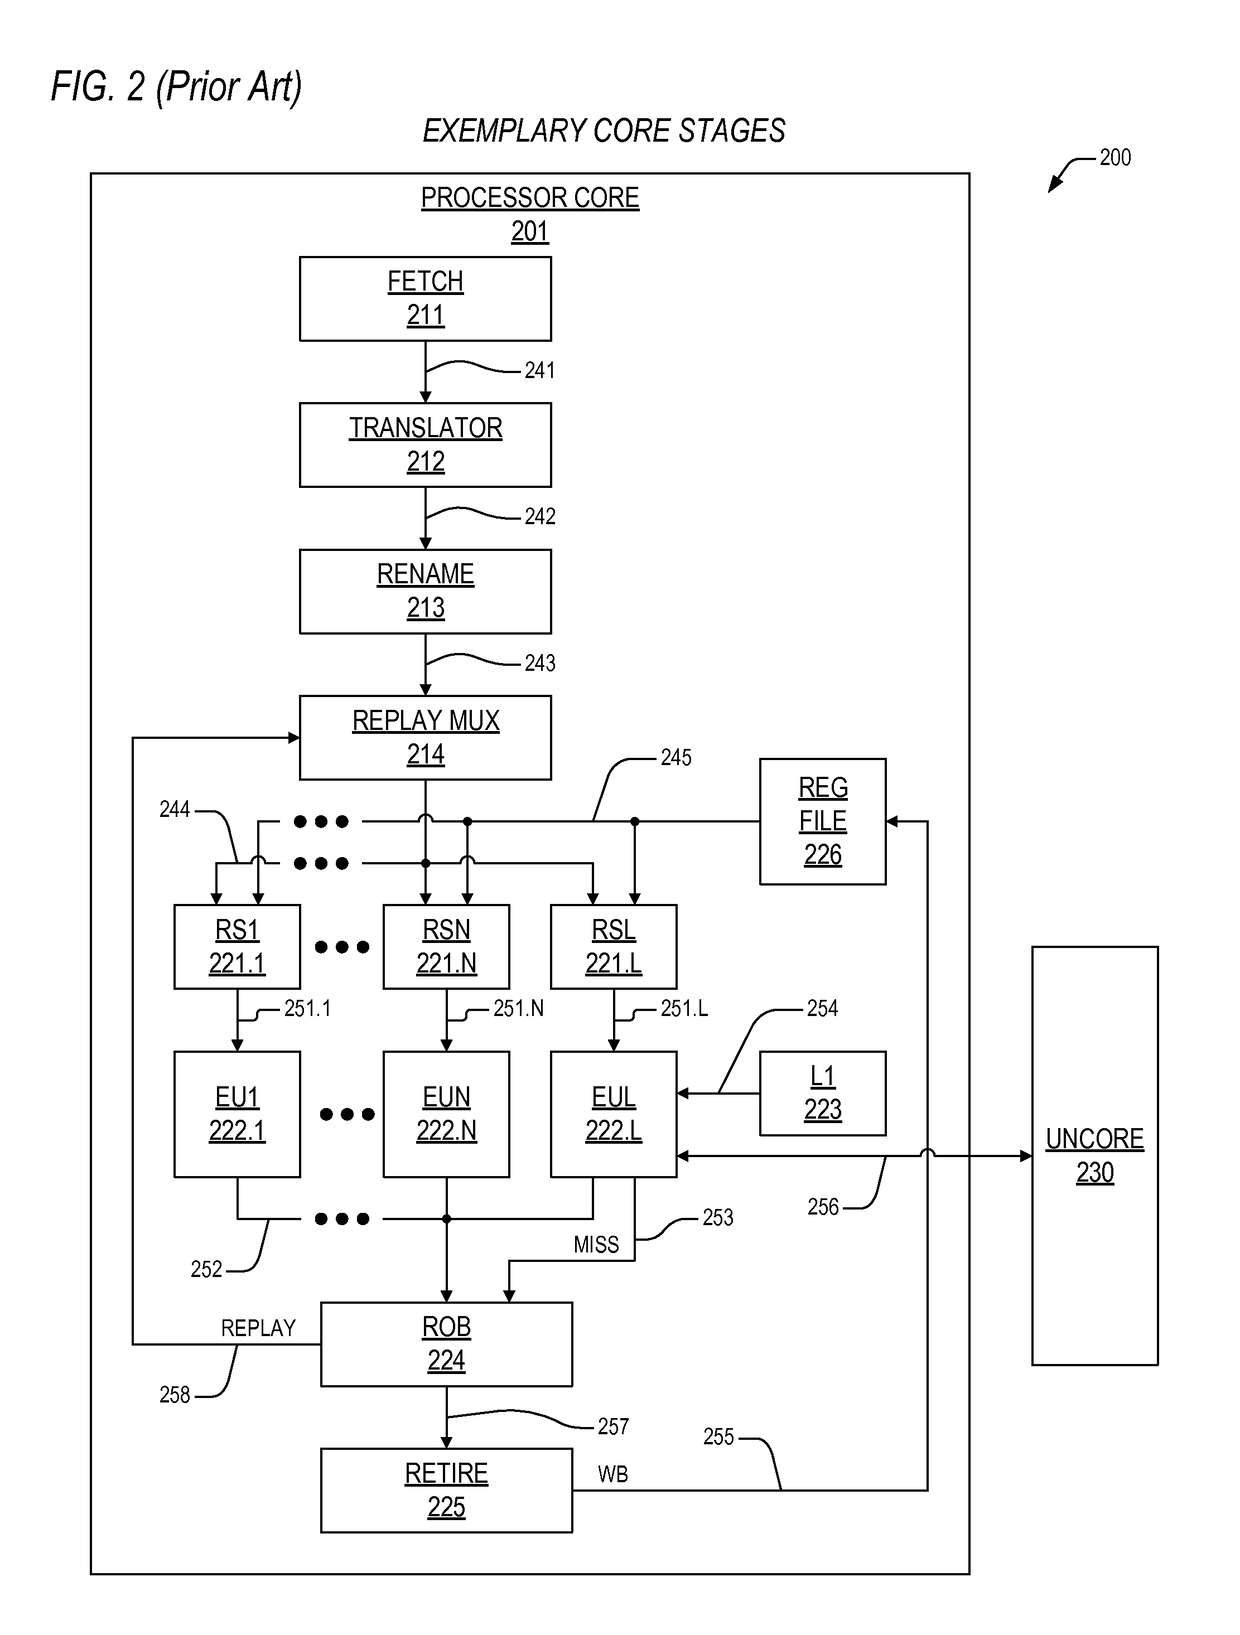 Apparatus and method to preclude X86 special bus cycle load replays in an out-of-order processor